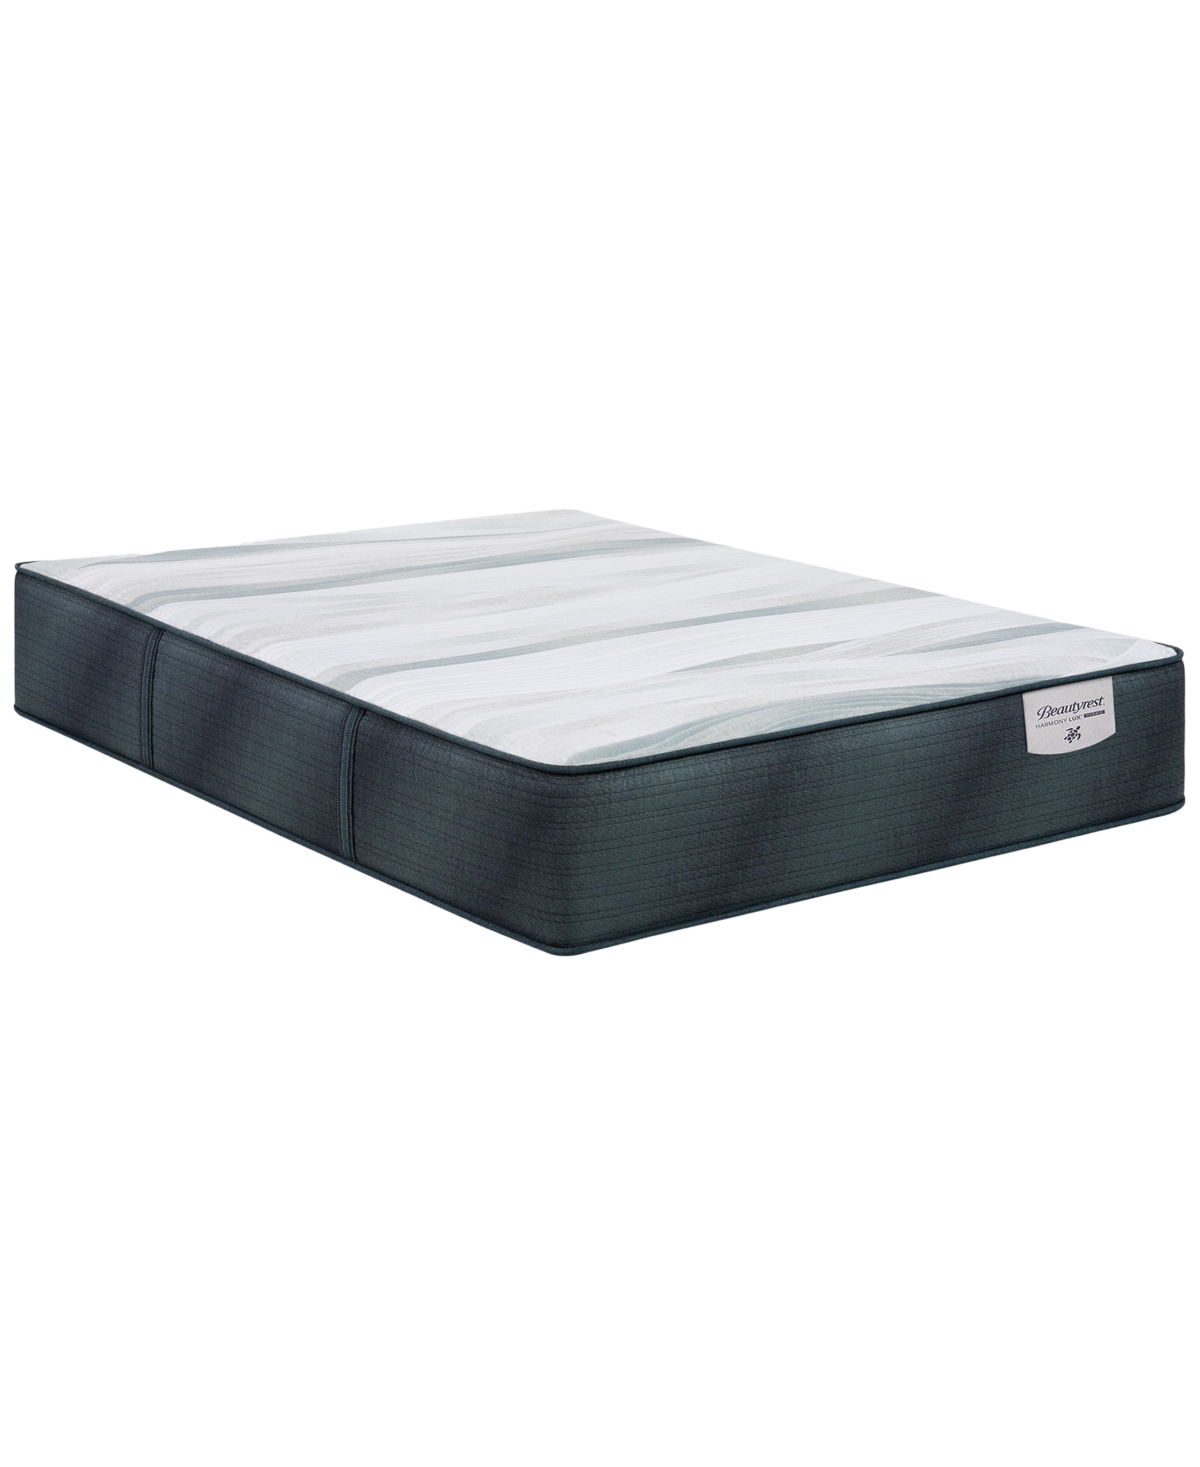 Beautyrest Harmony Lux Hybrid Ocean View Island 13 Firm Mattress Collection In No Color